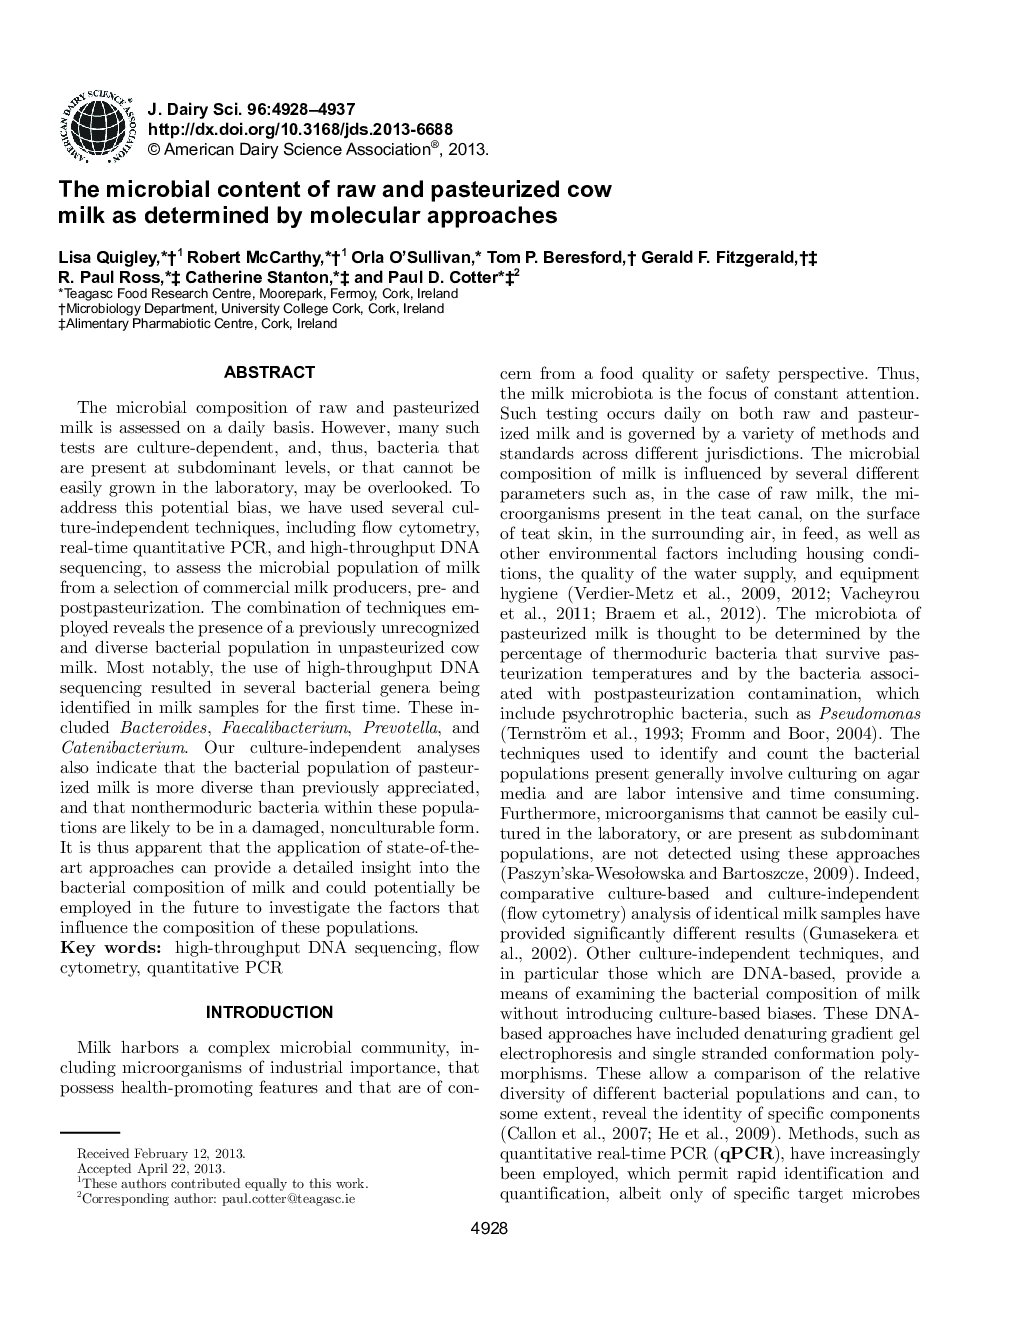 The microbial content of raw and pasteurized cow milk as determined by molecular approaches